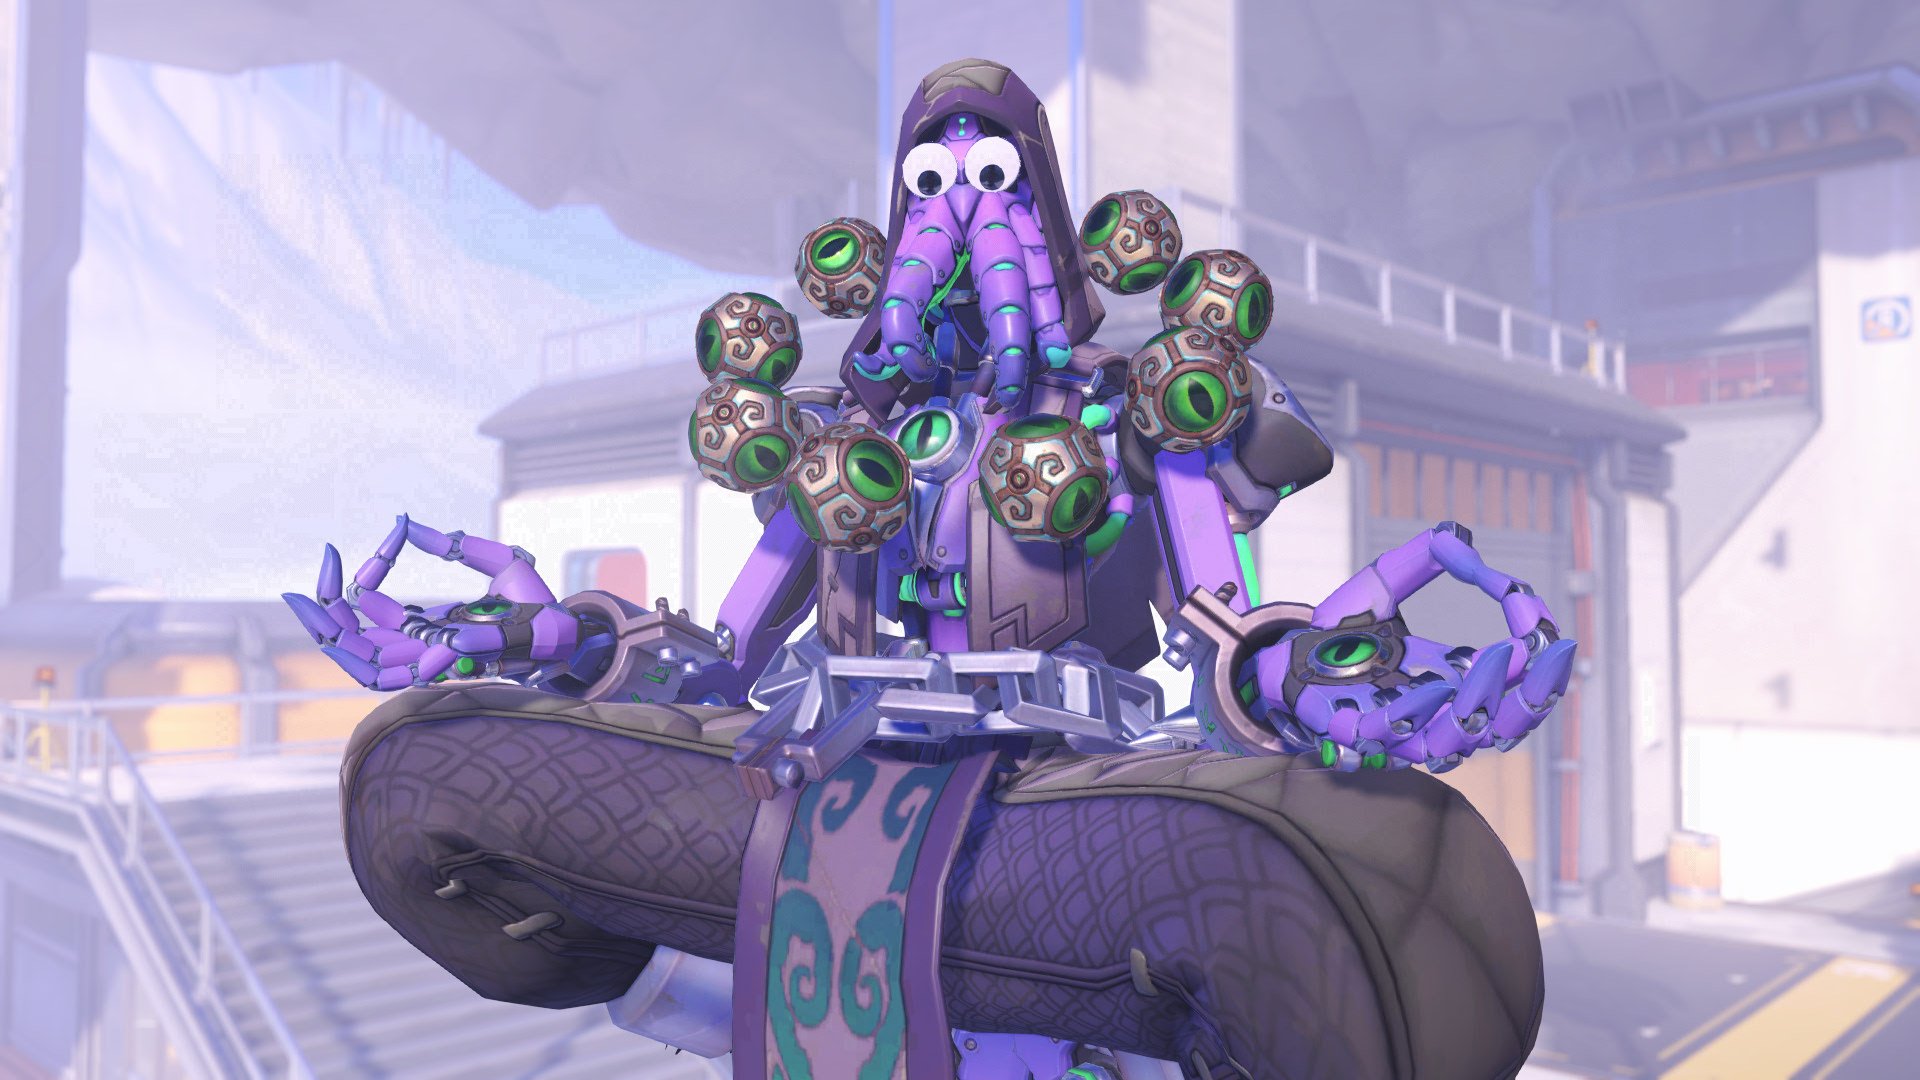 Overwatch’s April Fools' Prank gives everyone Googly eyes, including B